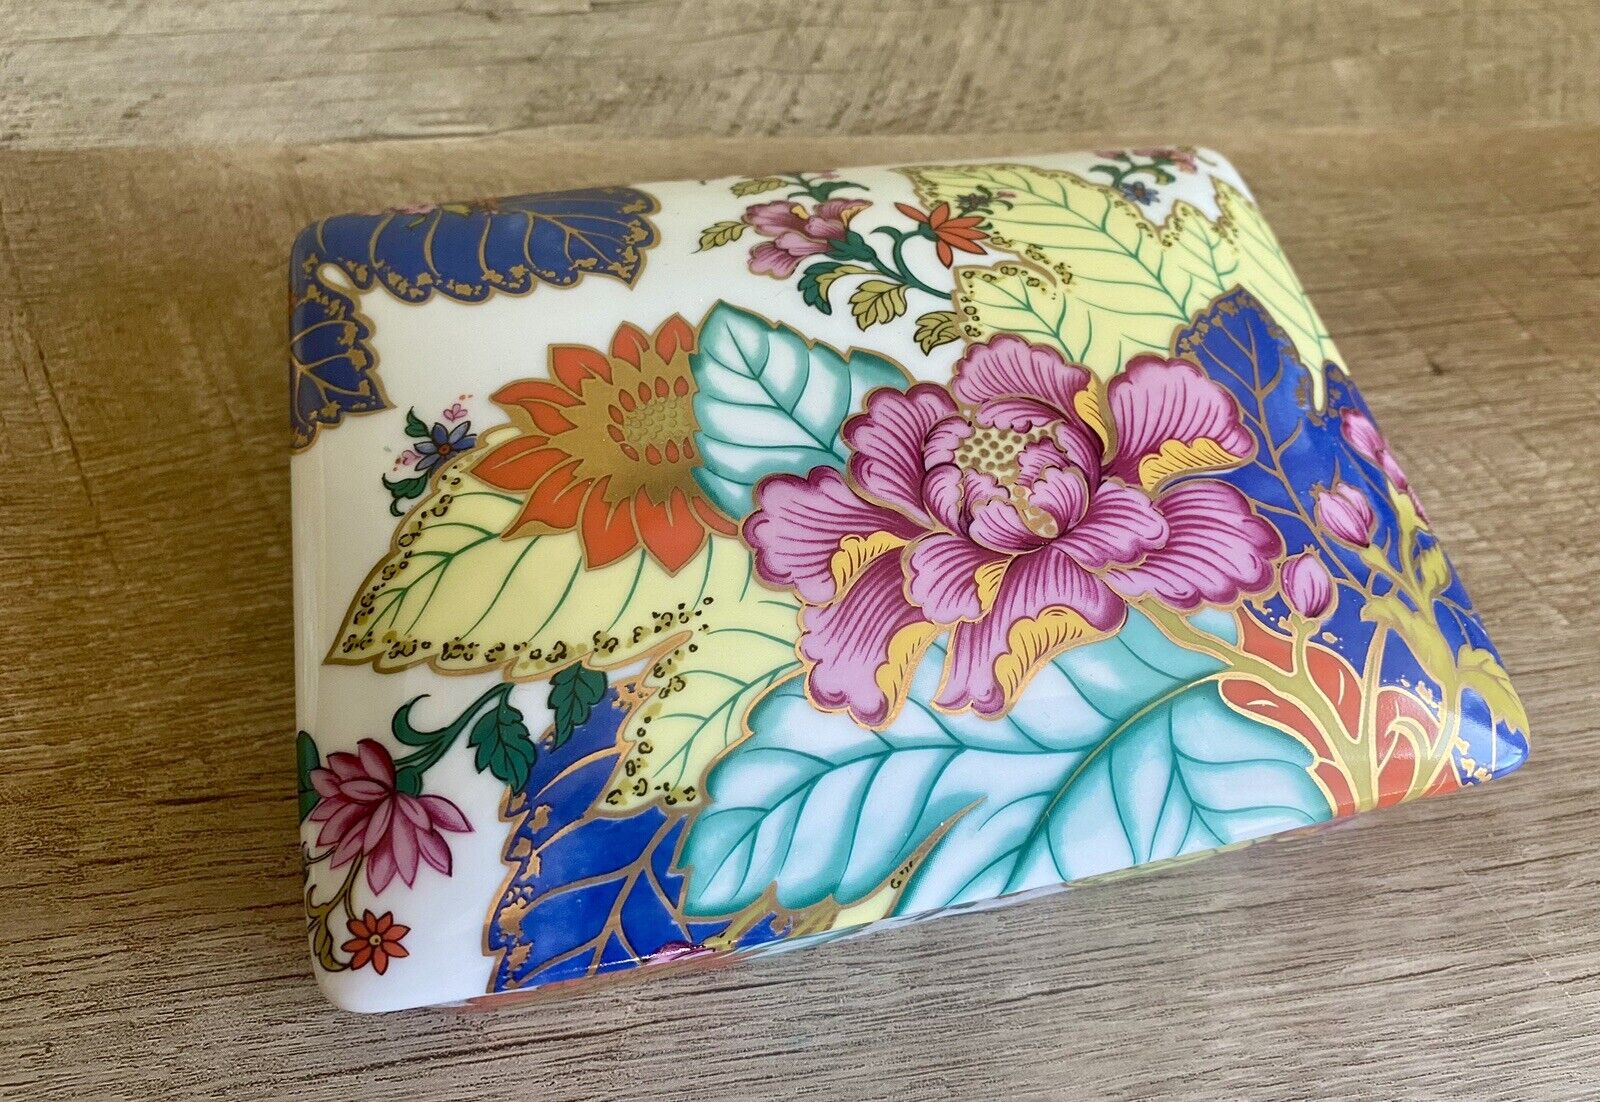 Horchow Tobacco Leaf Porcelain Trinket Box with Playing Cards